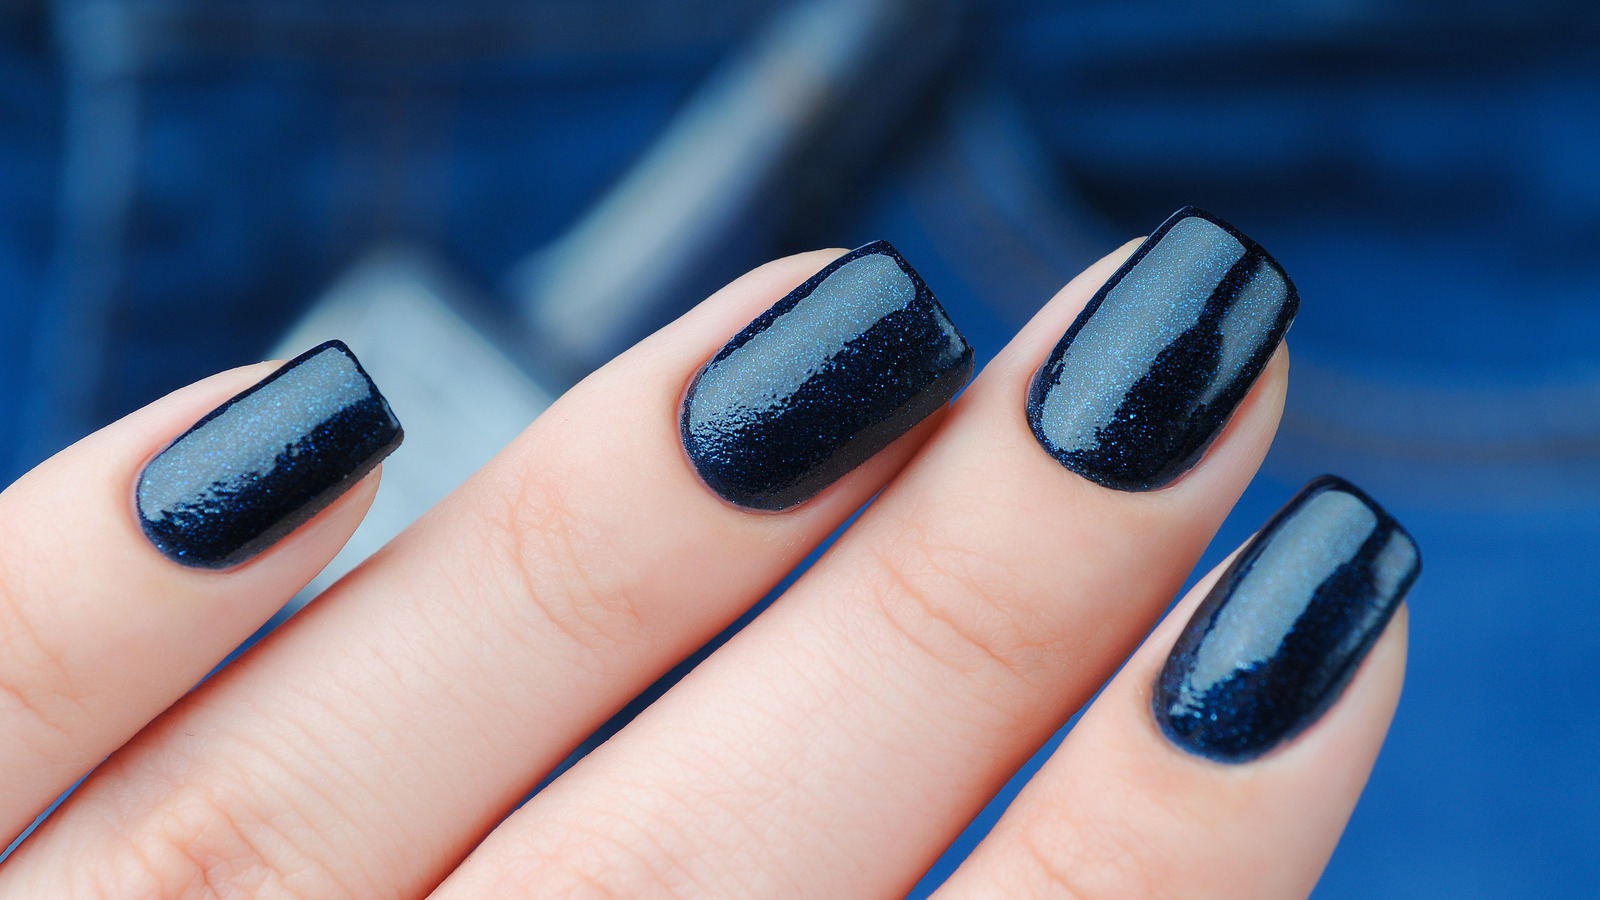 4. 20 Best Winter Nail Designs to Try This Season - wide 8